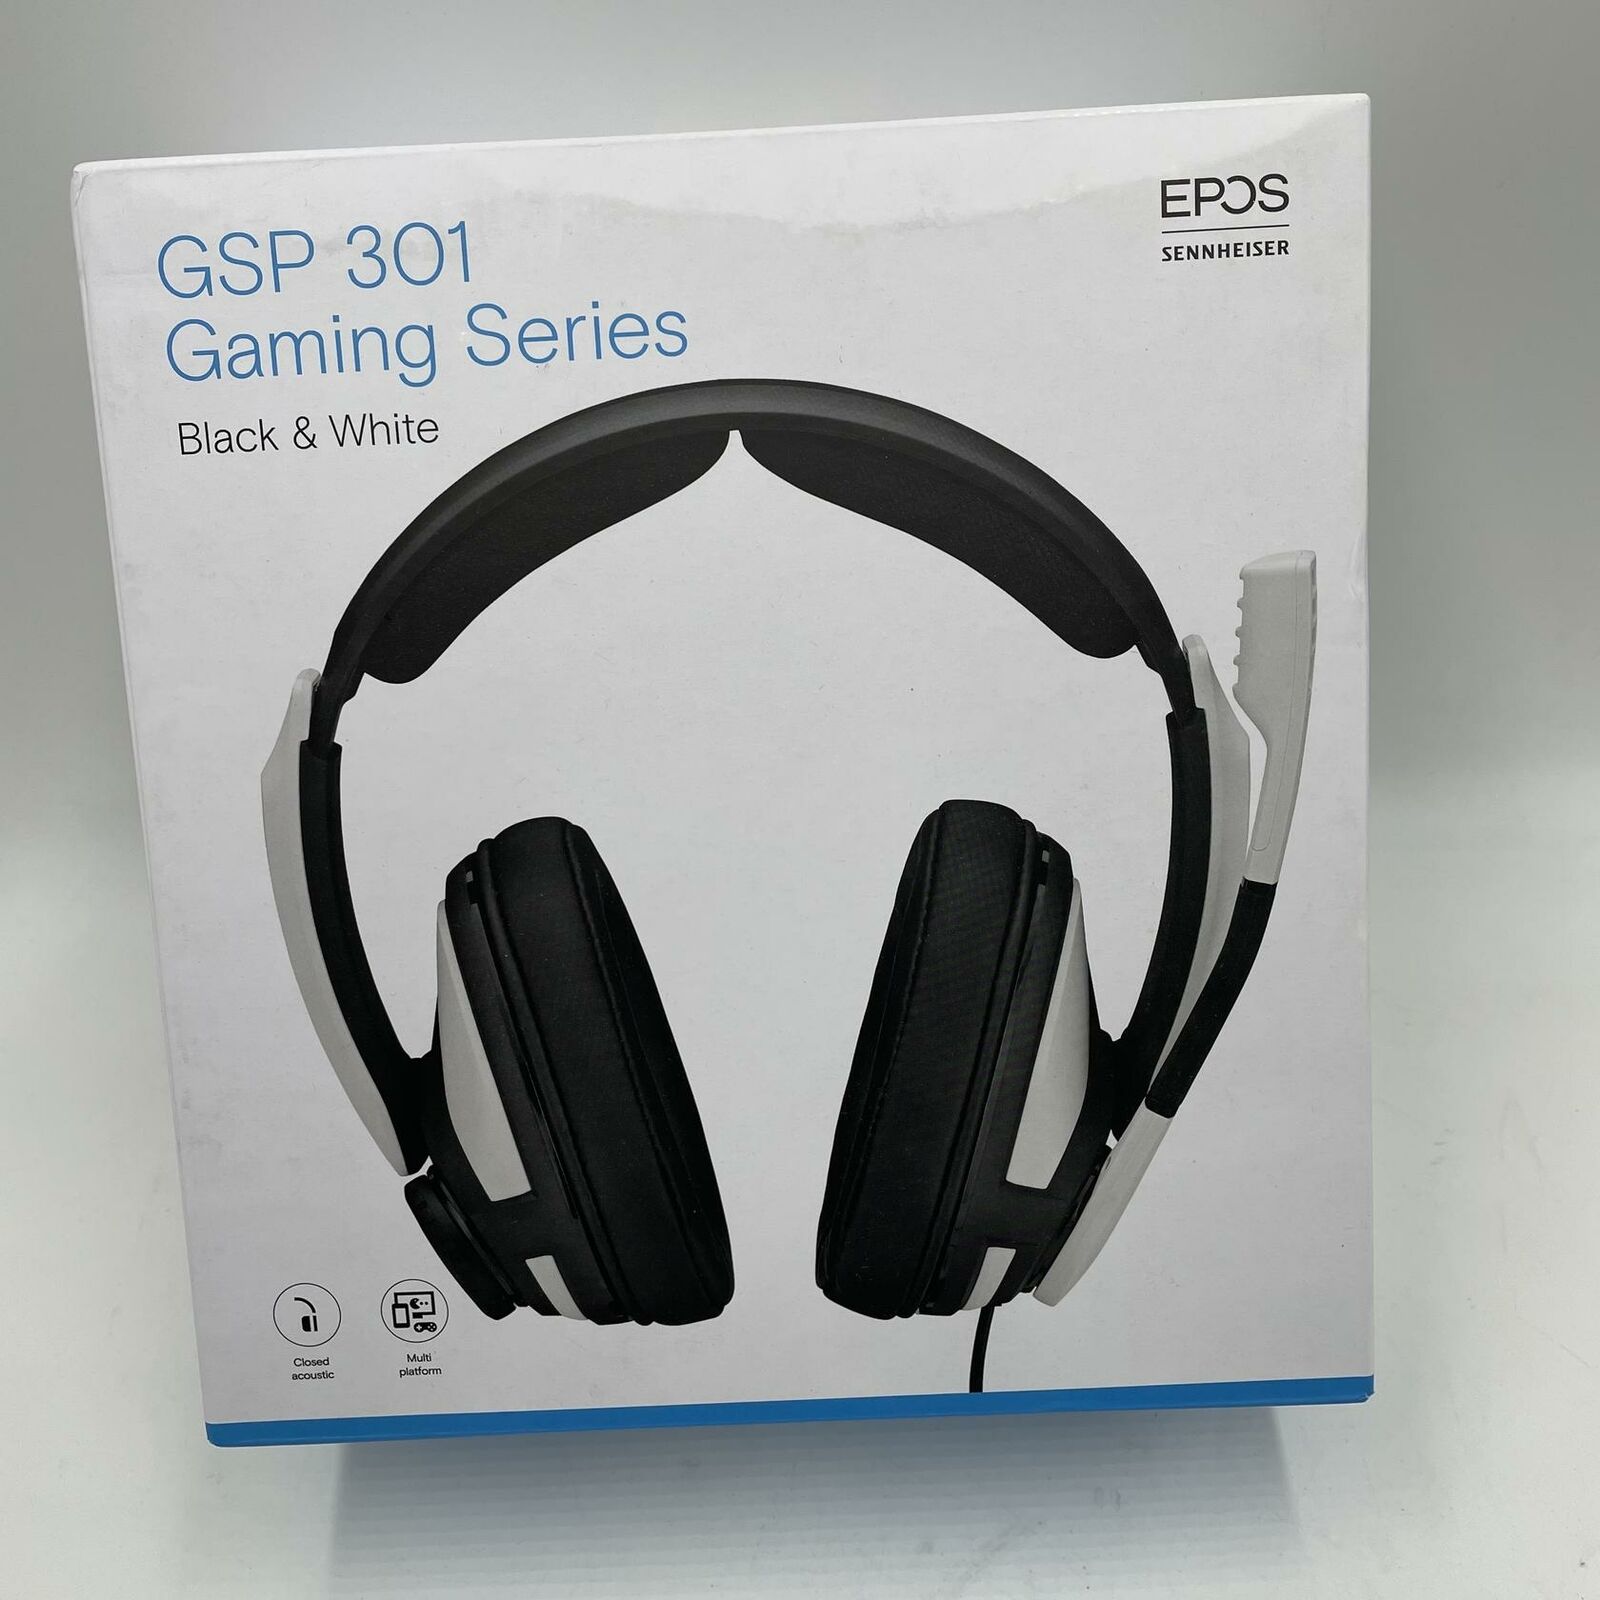 EPOS I Sennheiser GSP 301 Gaming Headset with Noise-Cancelling Mic